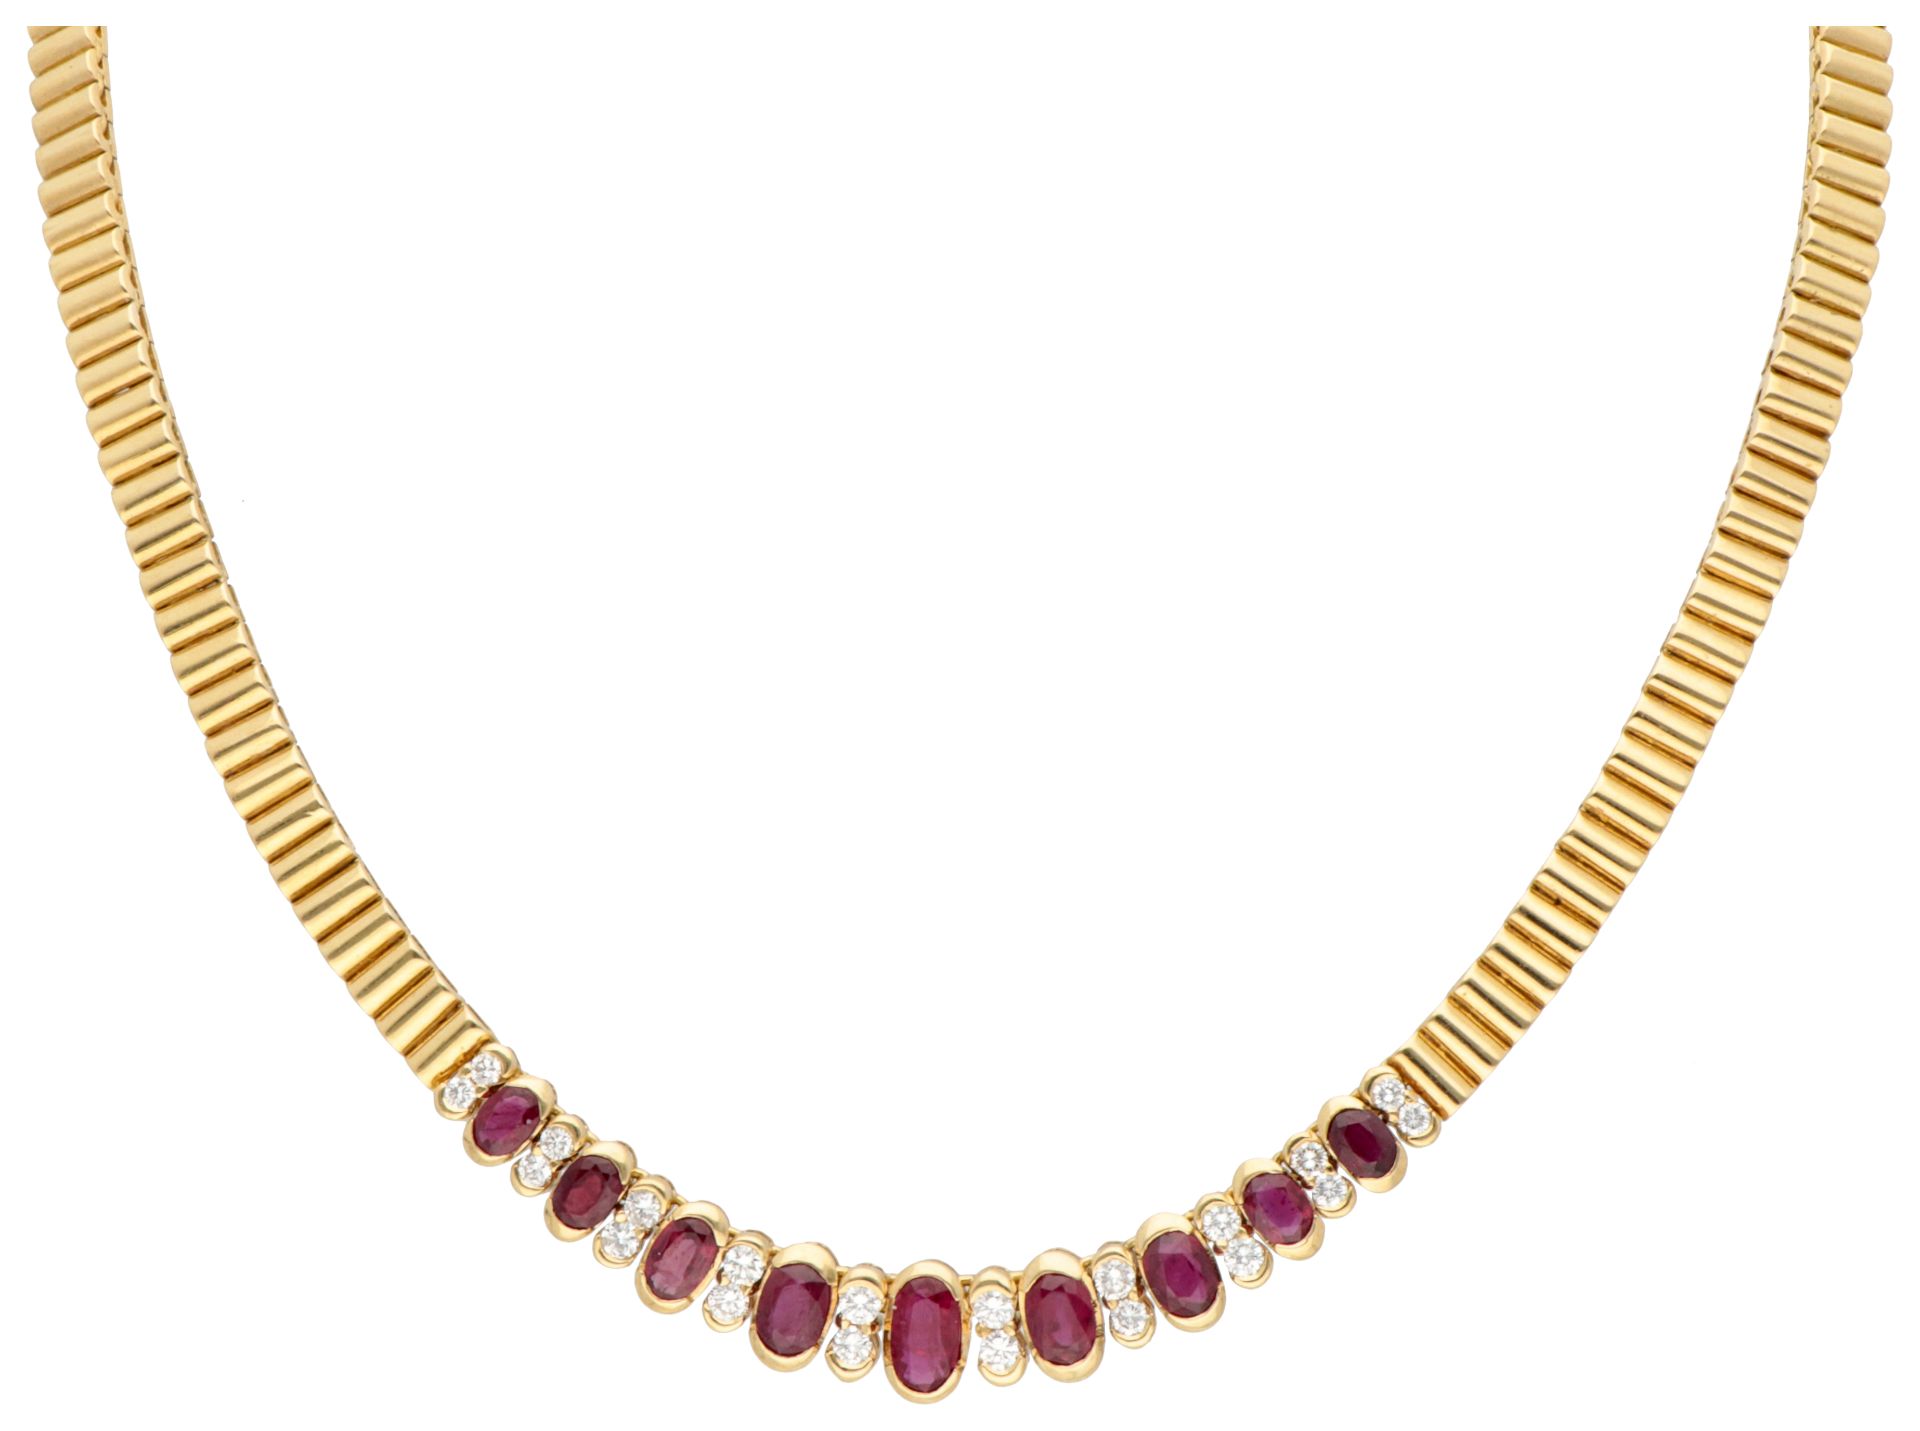 Aras 14K yellow gold choker set with natural rubies of approx. 3.44 ct. and approx. 0.80 ct. diamond